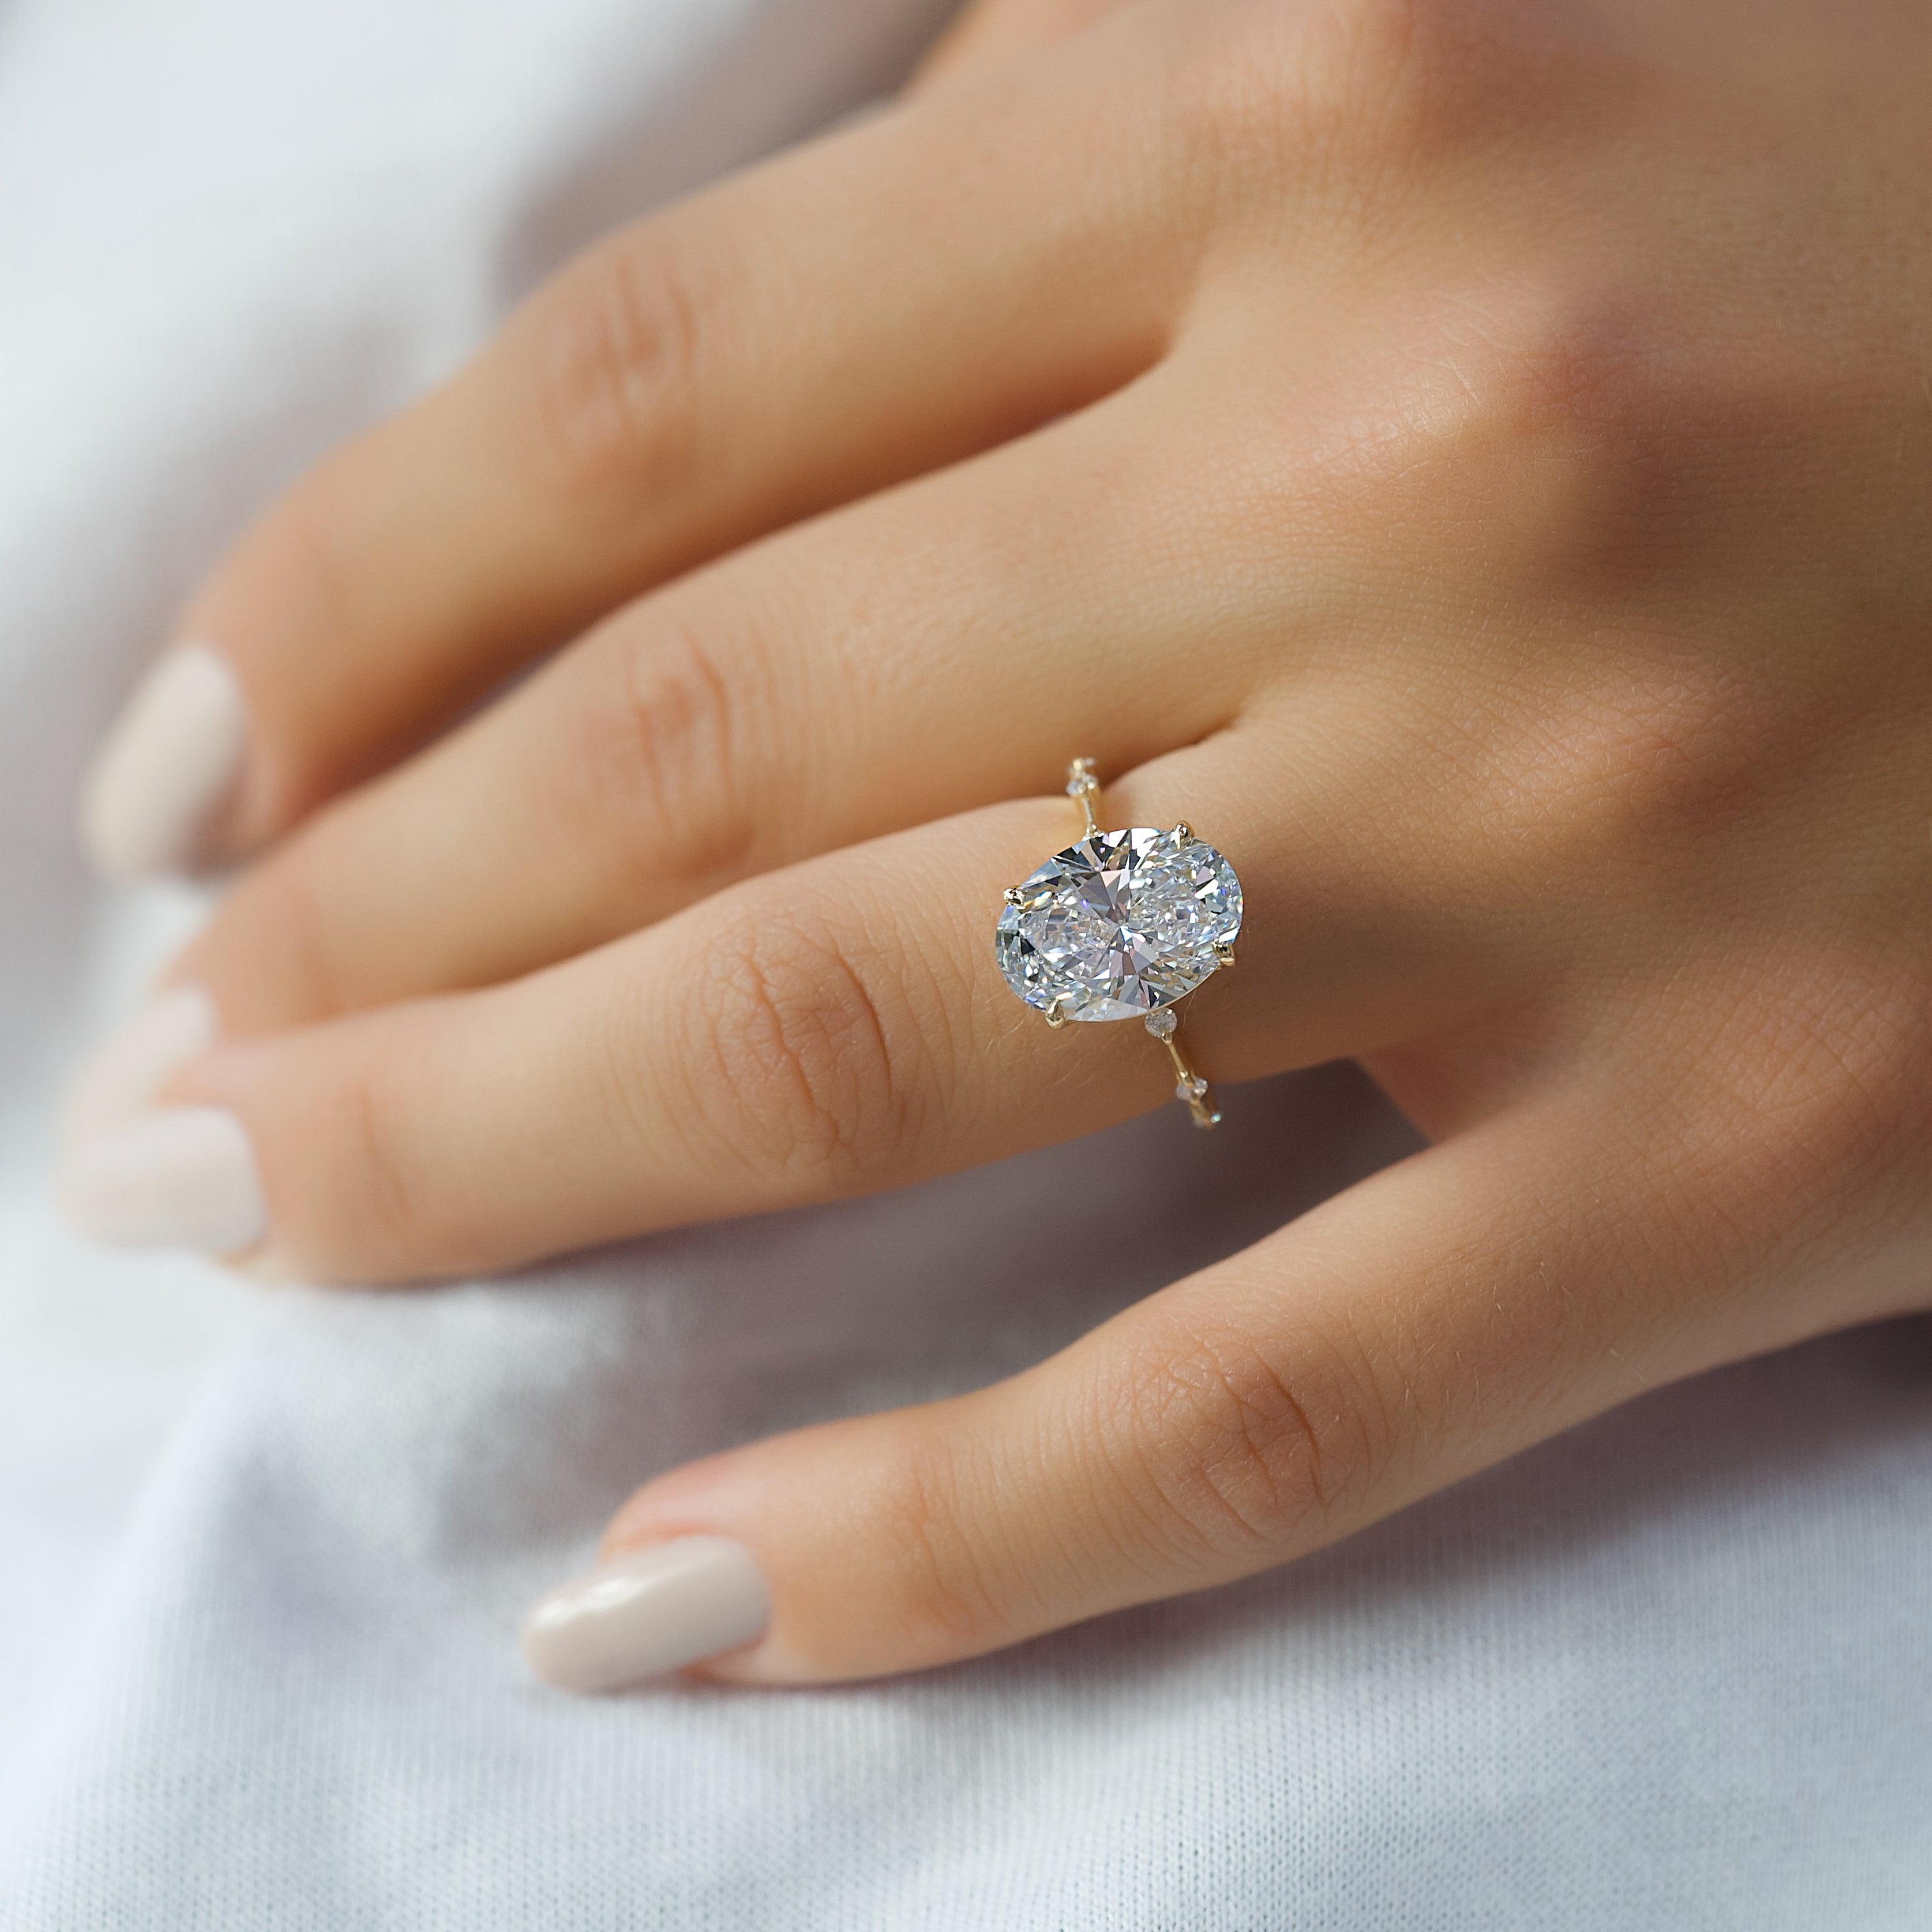 Why you should choose a 2-carat emerald cut diamond ring| Naturesparkle